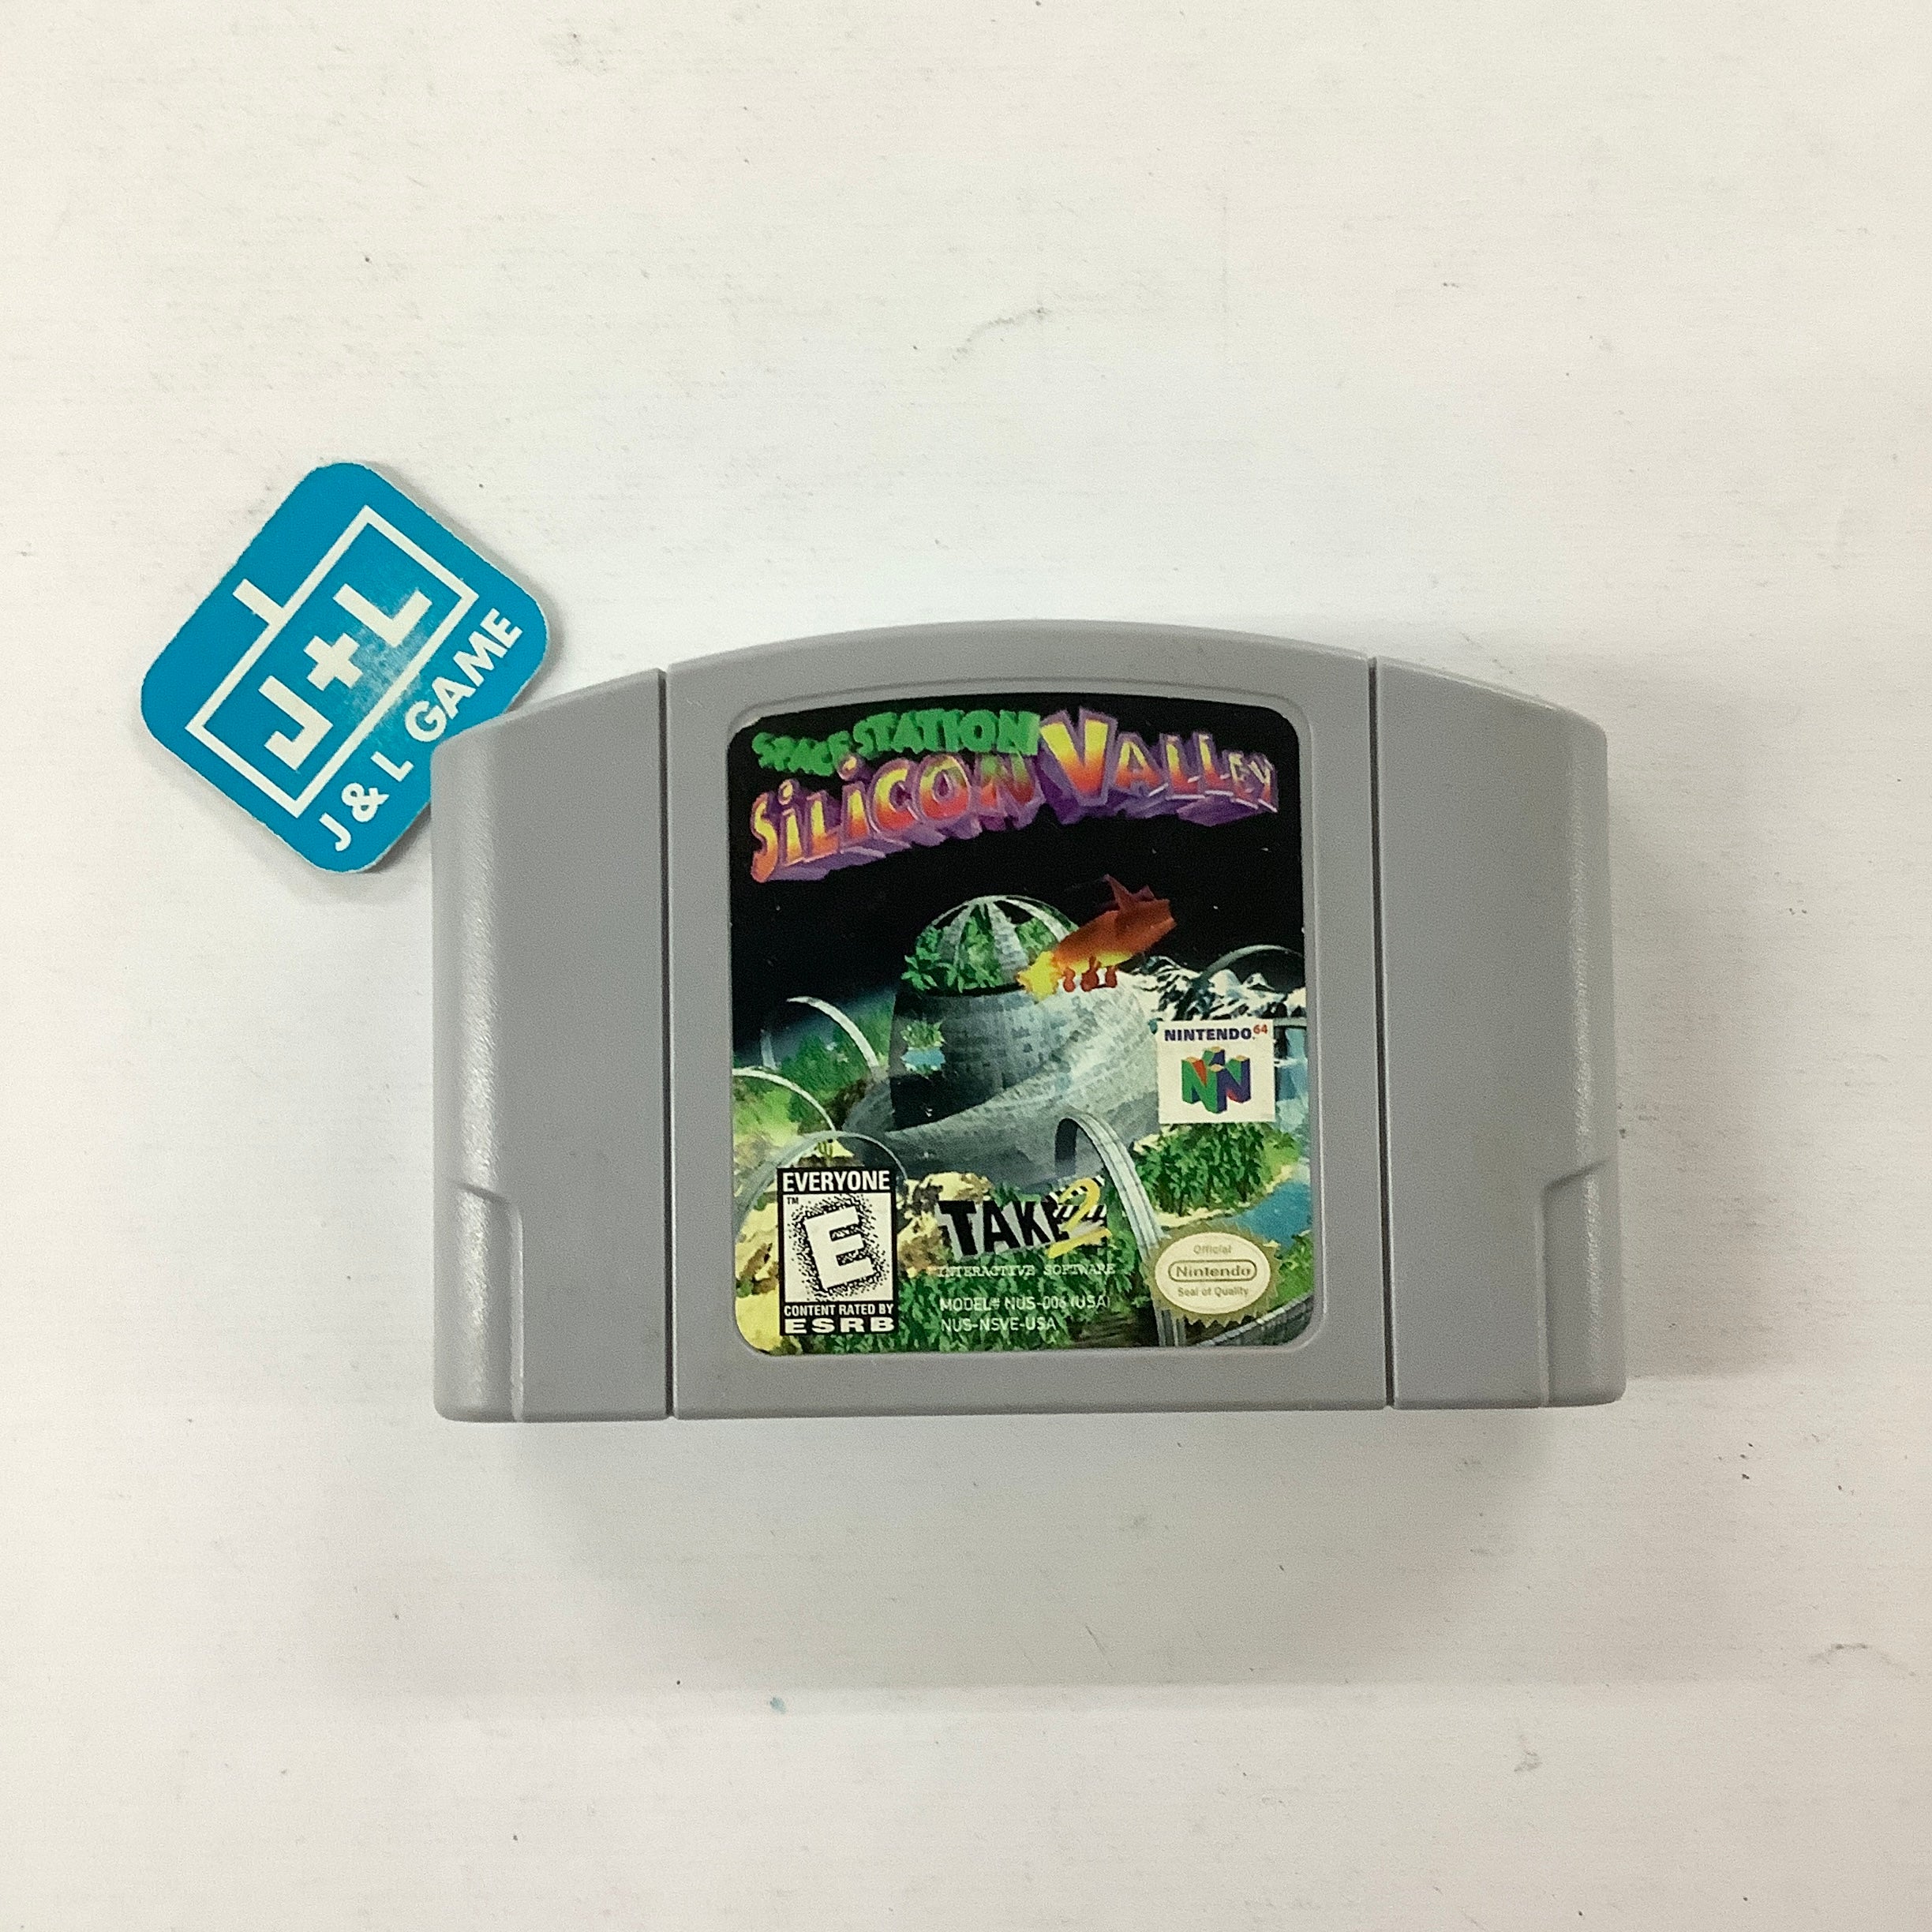 Space Station Silicon Valley - (N64) Nintendo 64 [Pre-Owned] Video Games Take-Two Interactive   